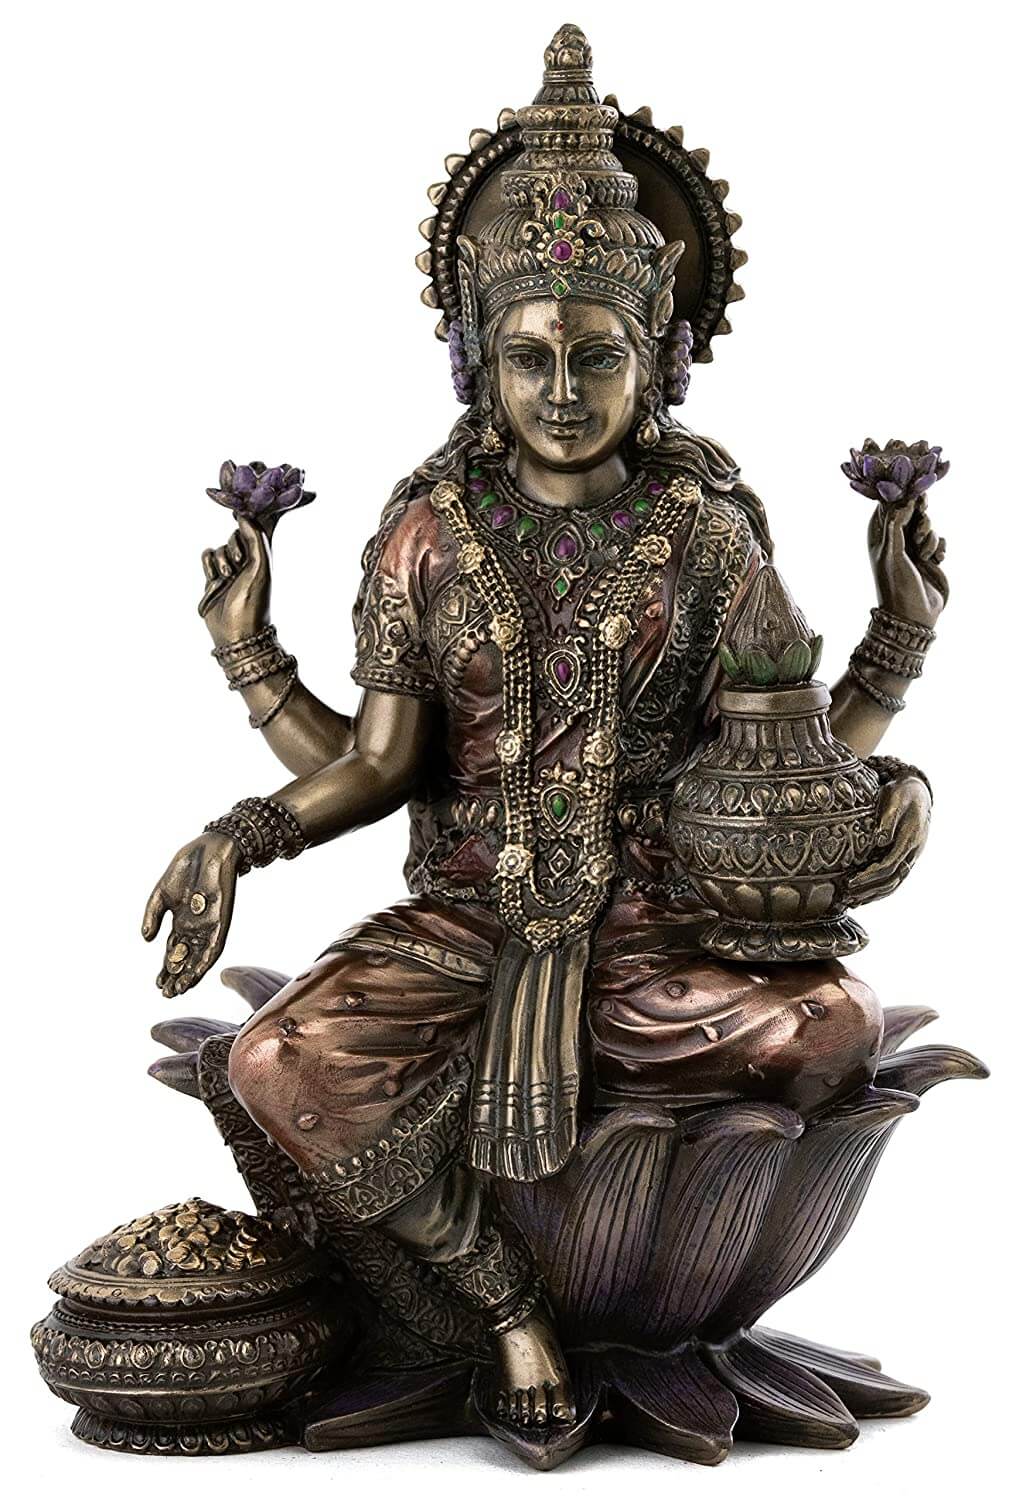 Bronze Lakshmi Statue Seated on Lotus Platform - Goddess of Wealth, Prosperity, Wisdom, and Fortune (Cold Cast Bronze, 7-Inch Tall) Mangal Fashions | Indian Home Decor and Craft